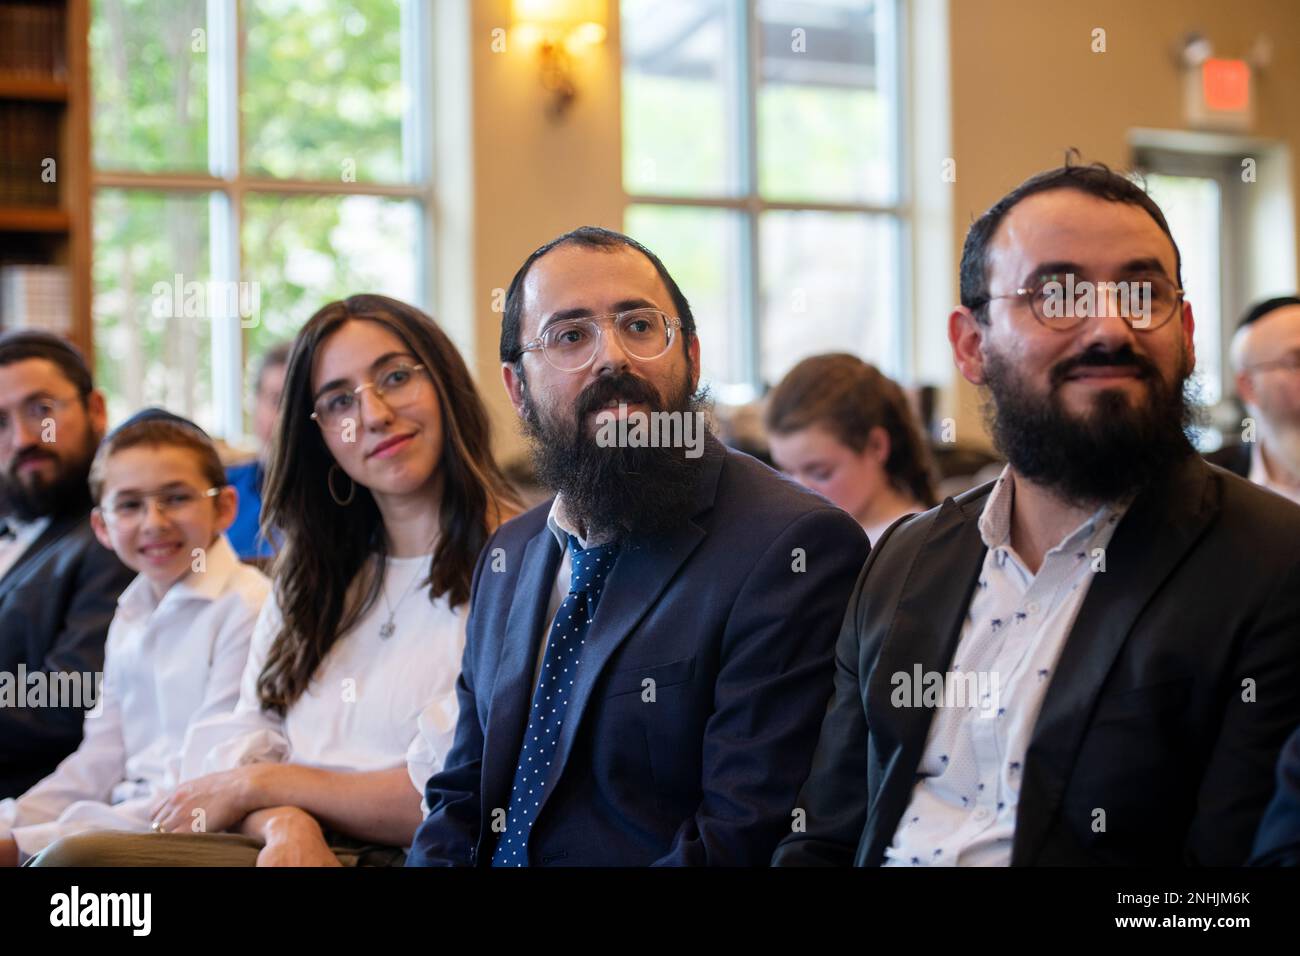 Friends and family members attend the awards ceremony of U.S. Army Air Corps 1st Lt. Gerald Teldon, retired, recognizing his honorable service as a pilot on July 29, 2022, at the Chabad Center for Jewish Life and Learning, San Antonio, Texas. Teldon, born in Bronx, N.Y., in 1924, joined the military in 1944. He completed 62 missions during WWII and the Korean War. Lt. Col. Andrew Stein, 502nd Operations Support Squadron commander, was the presiding officers. The awards presented to Teldon are as follows: the Air Medal; American Campaign Medal; European – African – Middle Eastern Campaign Medal Stock Photo